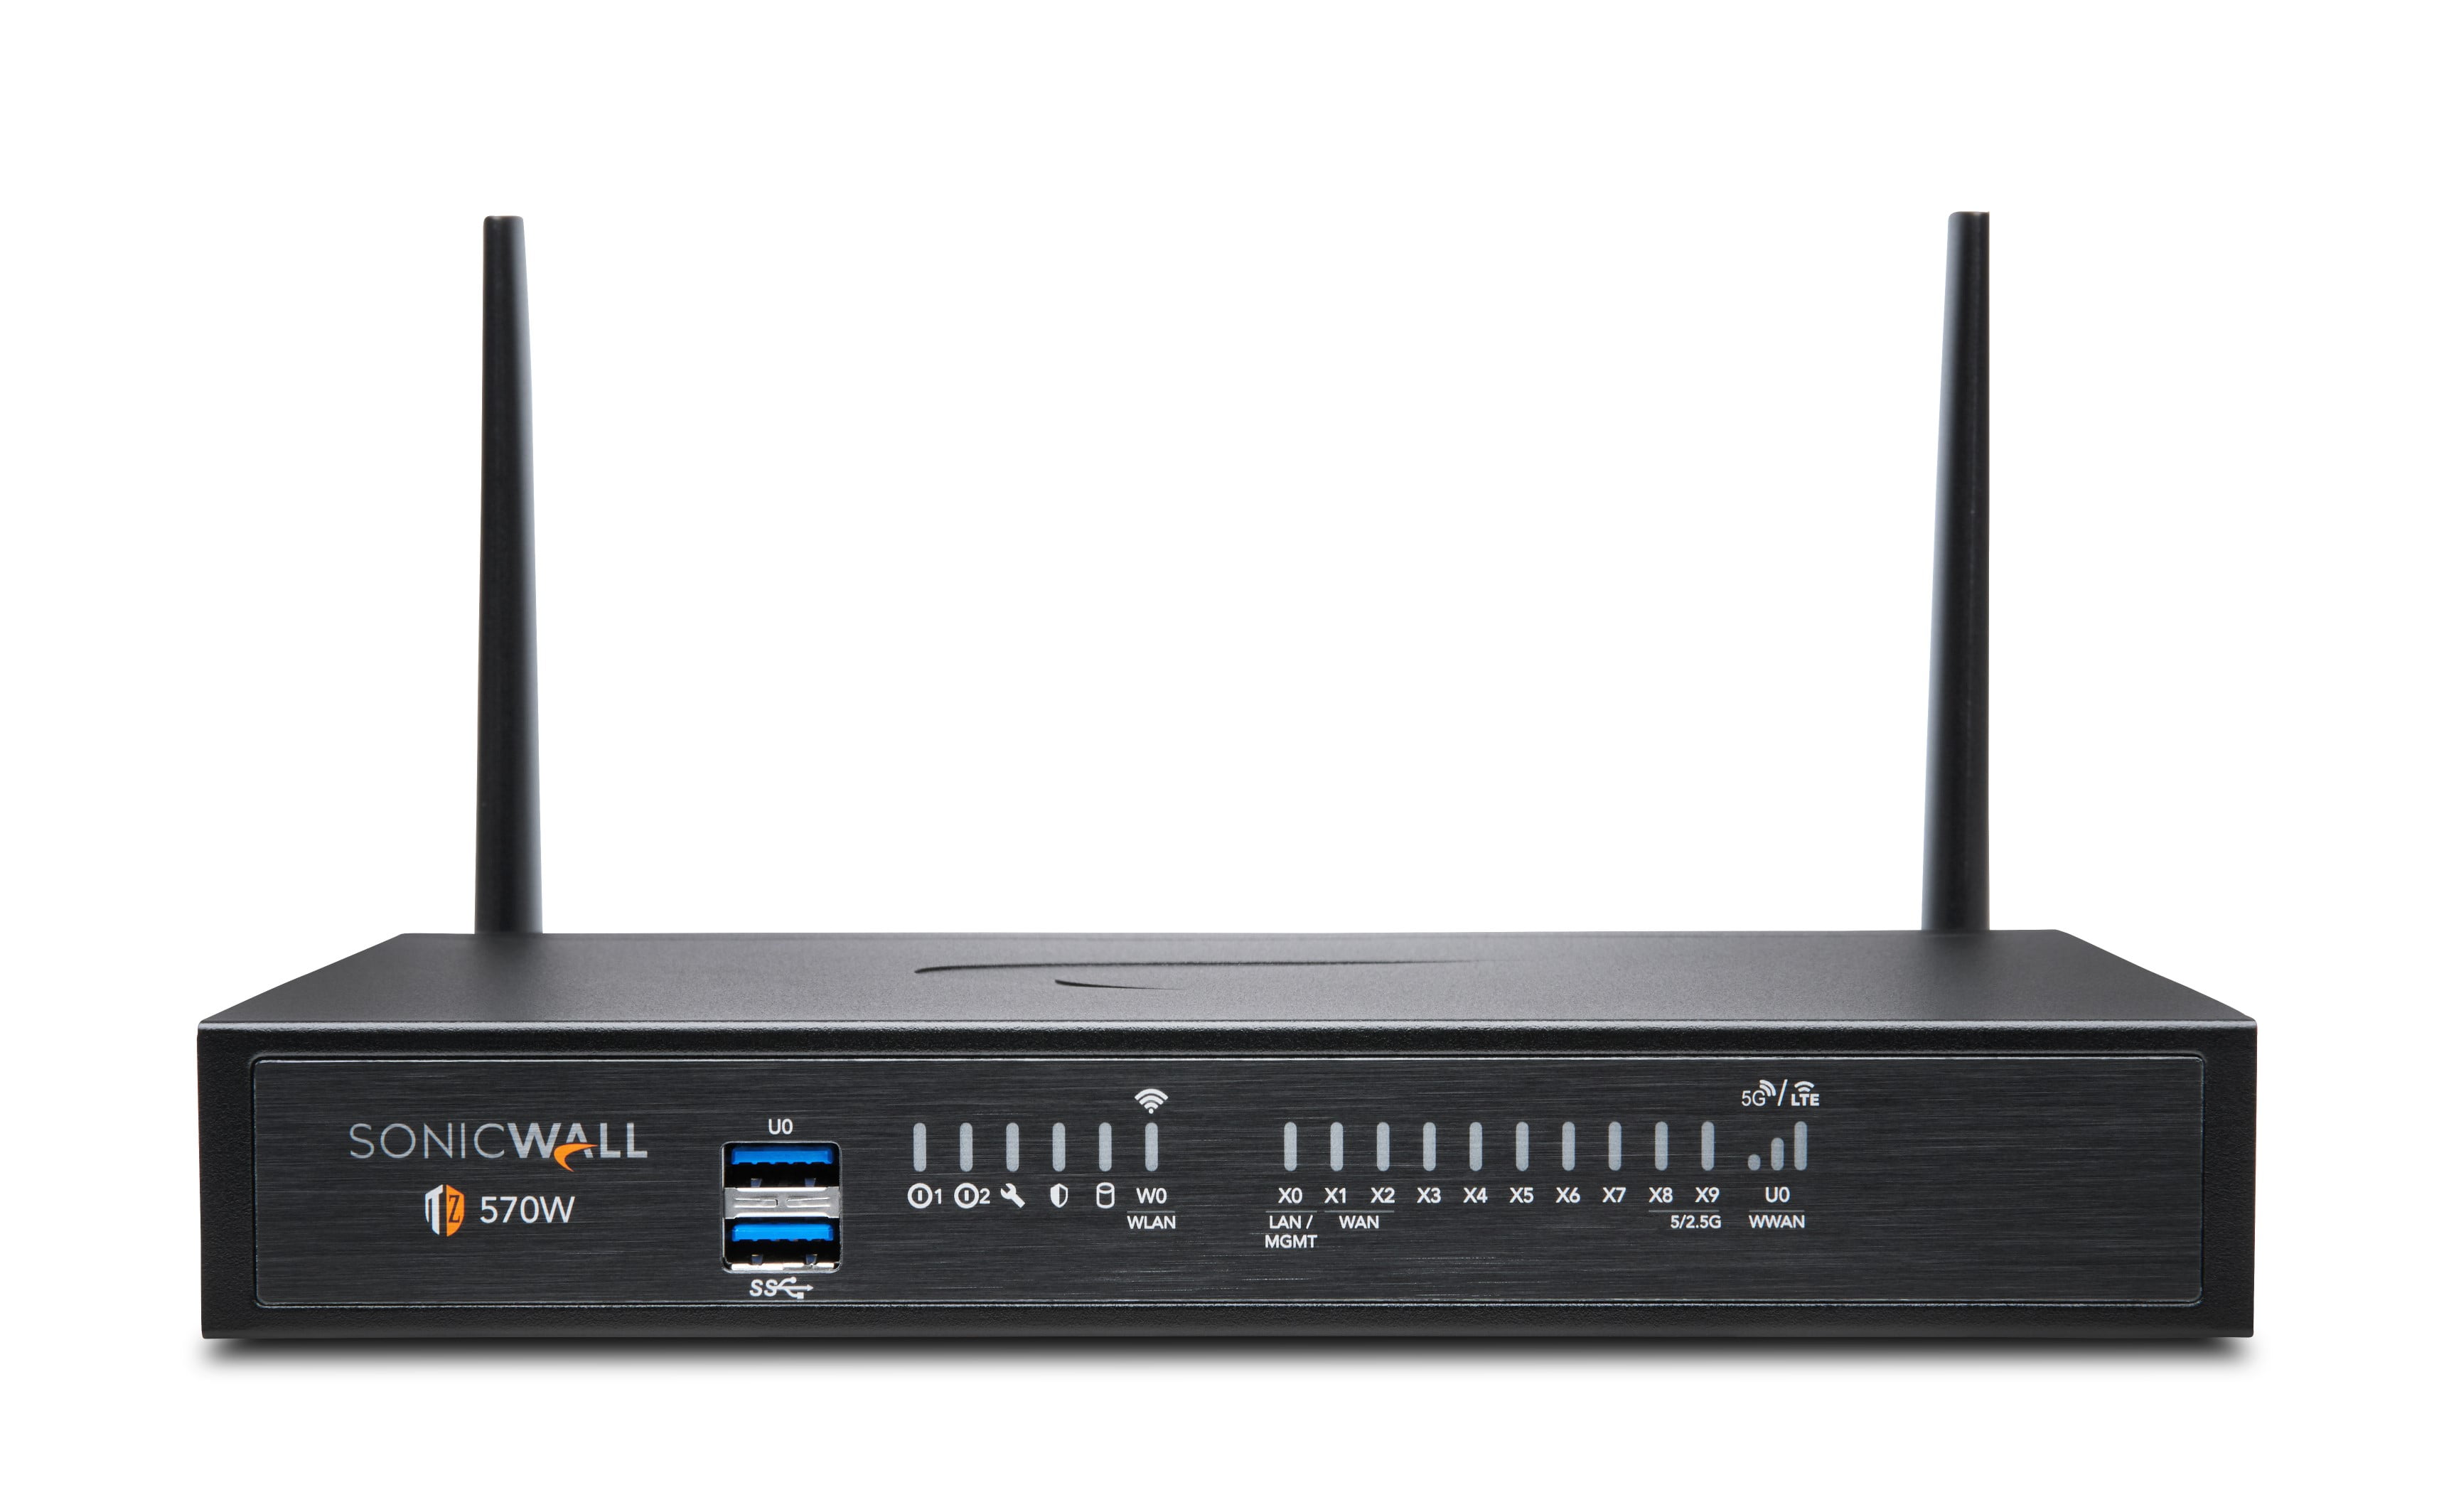 SONICWALL TZ570W + ESSENTIAL PROTECTION SERVICE SUITE (EPSS)